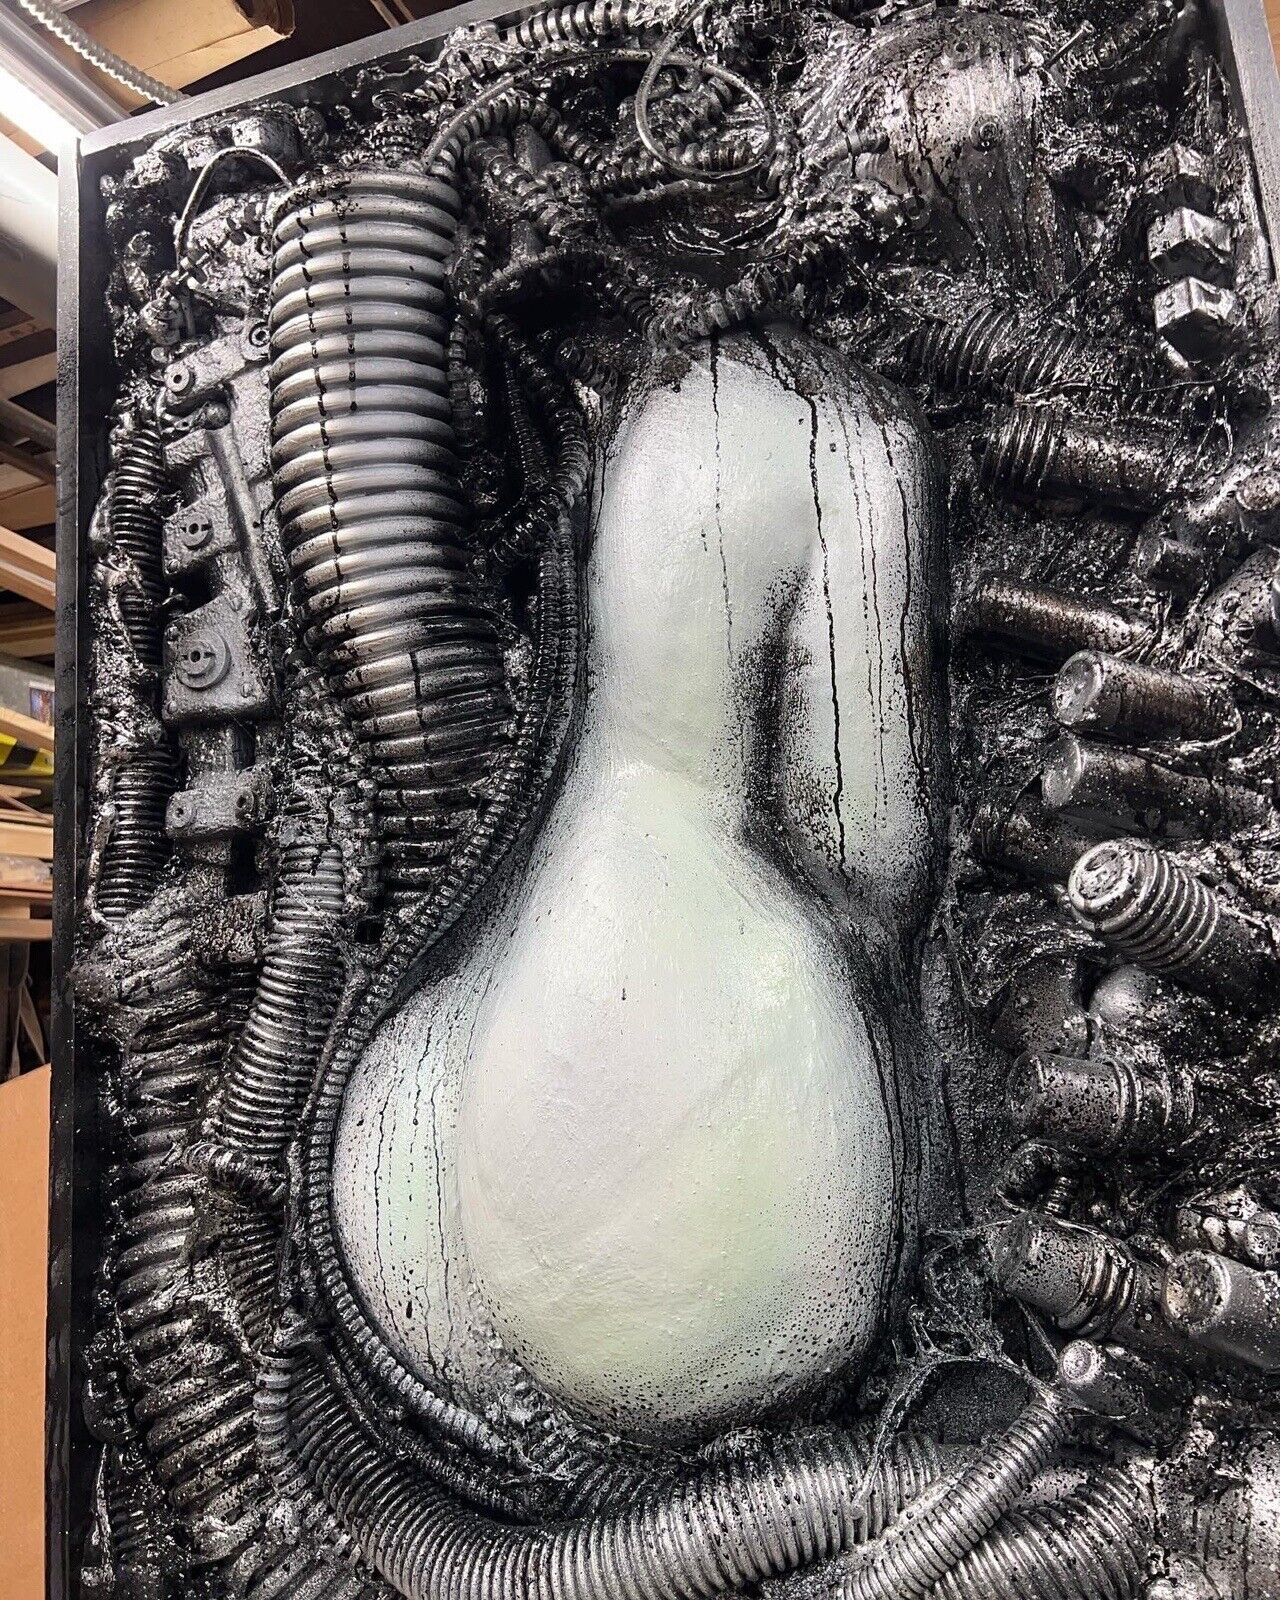 Currently unaltd -life size biomechanical HR Giger inspired